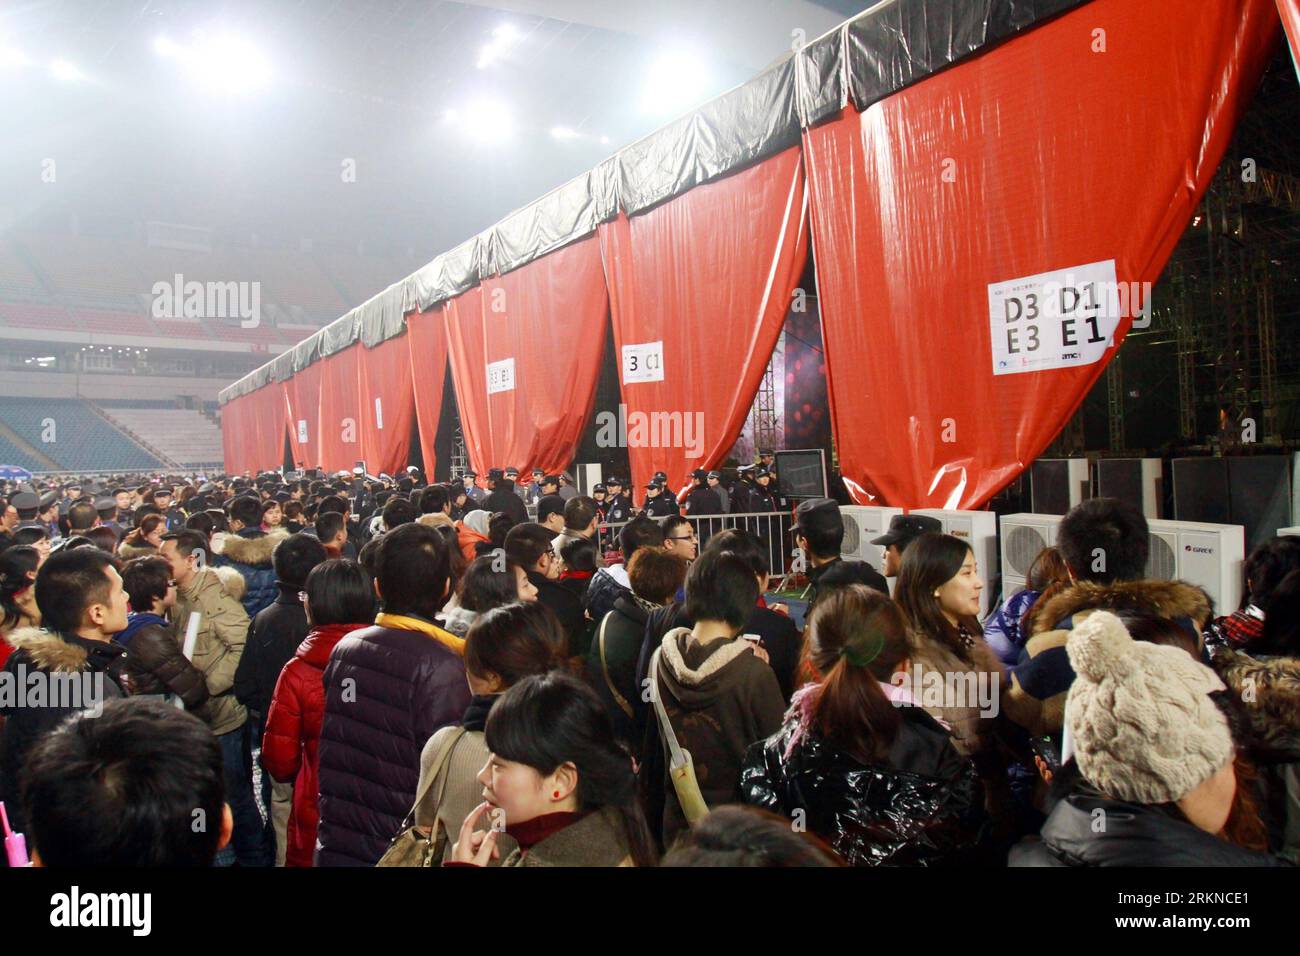 Bildnummer: 57084825  Datum: 17.02.2012  Copyright: imago/Xinhua (120217) -- CHONGQING, Feb. 17, 2012 (Xinhua) -- Audiences wait to evacuate from the stadium in Chongqing, southwest China, Feb. 17, 2012. The E1 and F1 auditorium of Faye Wong s concert collapsed at about 8:10 p.m. before the show begins on Friday and the concert was cancelled. (Xinhua) (zkr) CHINA-CHONGQING-FAYE WONG-CONCERT-COLLAPSE(CN) PUBLICATIONxNOTxINxCHN Gesellschaft Unglück Unfall Einsturz Stadion Stadioneinsturz premiumd xns x0x 2012 quer      57084825 Date 17 02 2012 Copyright Imago XINHUA  Chongqing Feb 17 2012 XINHUA Stock Photo